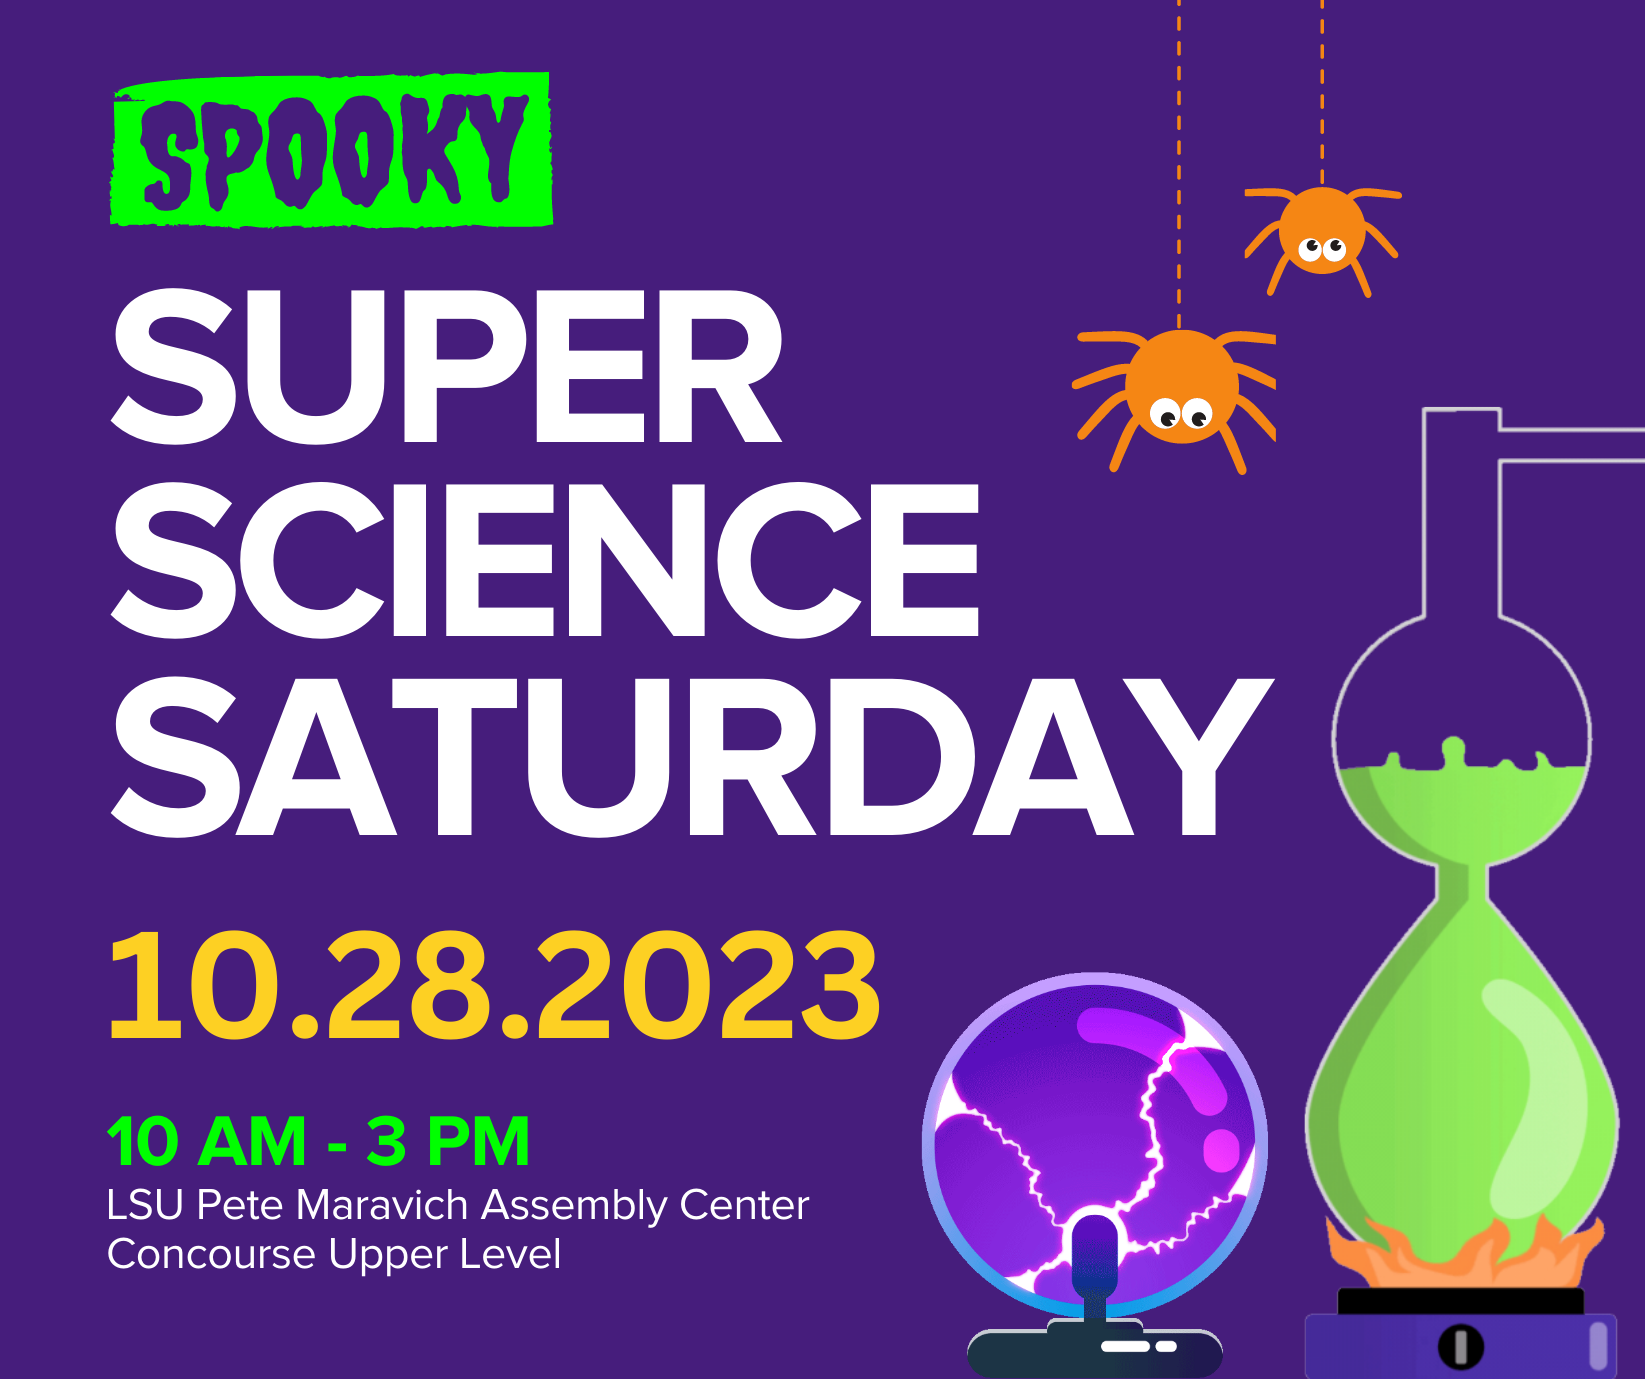 Text saying "Spookey Super Science Saturday October 28, 2023 from 10 AM to 3 PM in the PMAC" and pictires of beakers and spiders